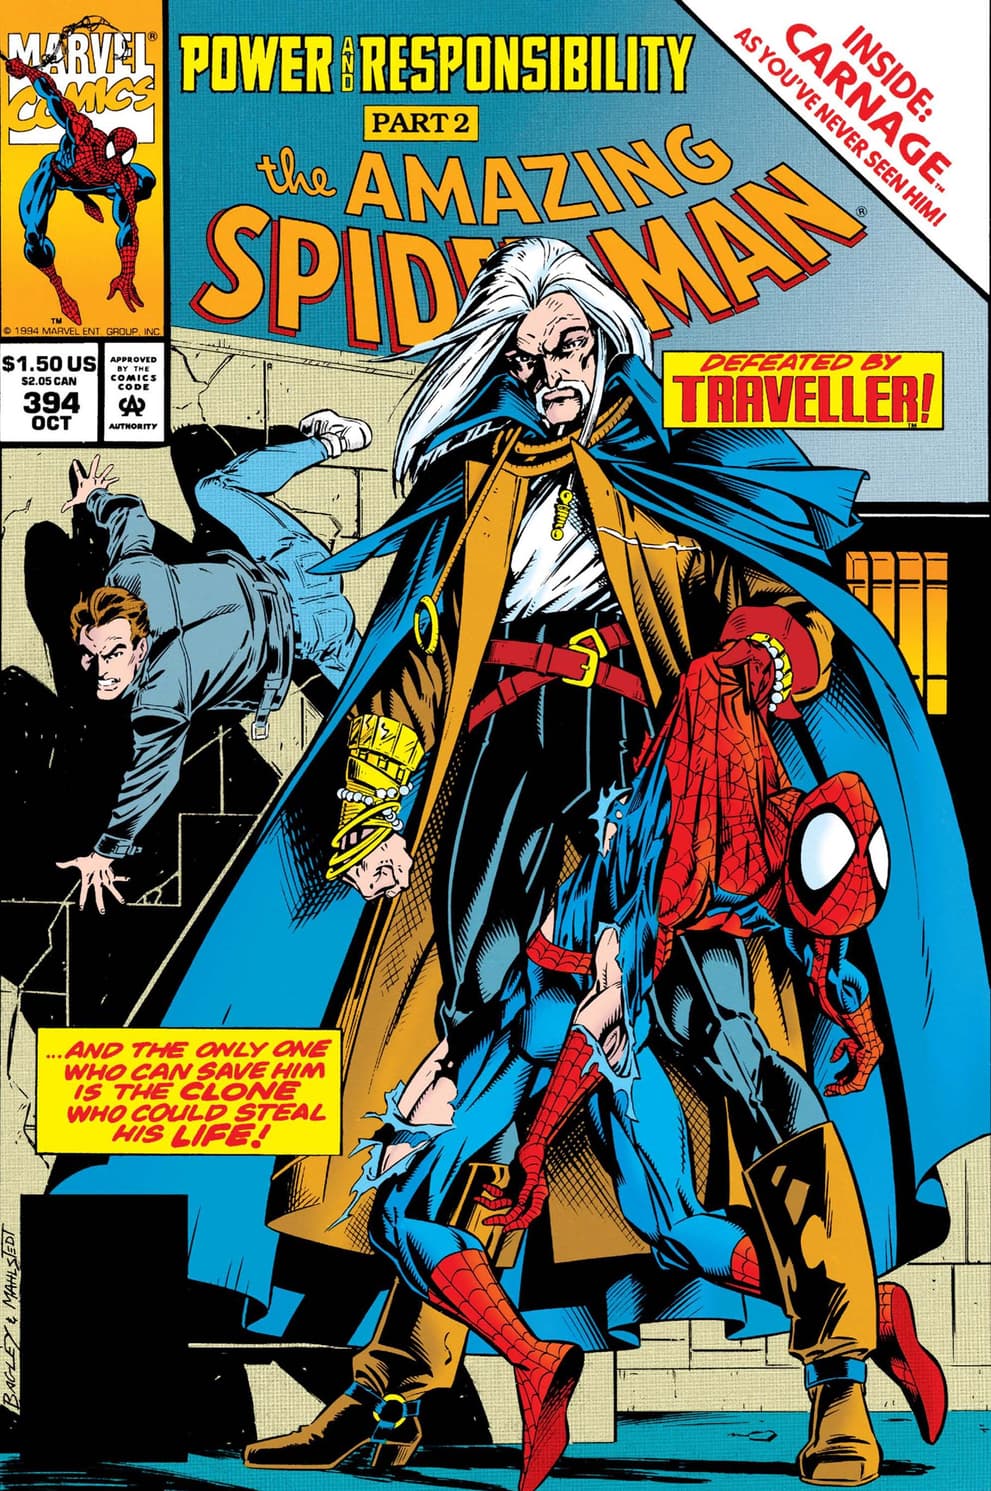 AMAZING SPIDER-MAN (1963) #394 cover by Mark Bagley, Larry Malstedt, and Bob Sharen